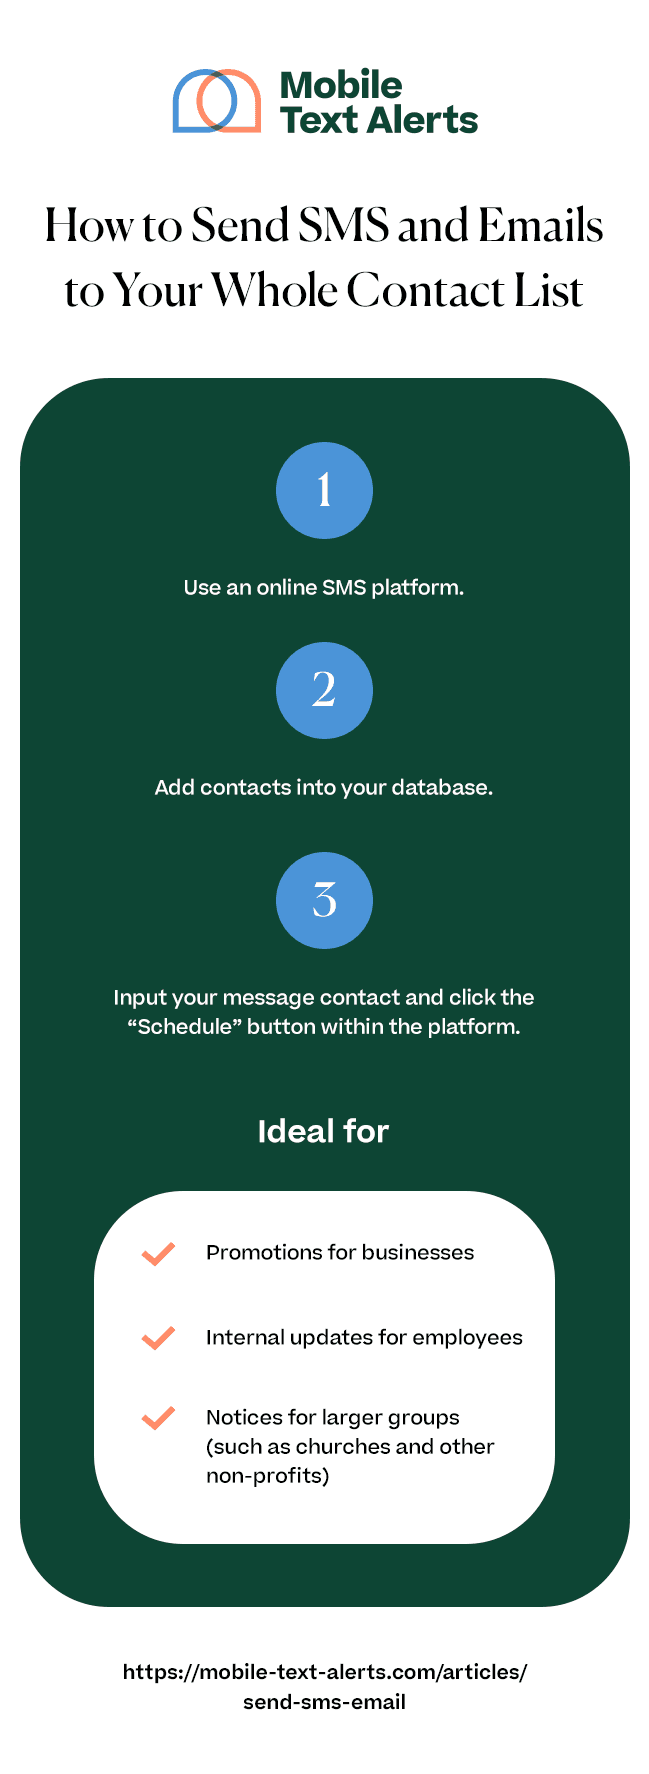 How to Send SMS and Emails